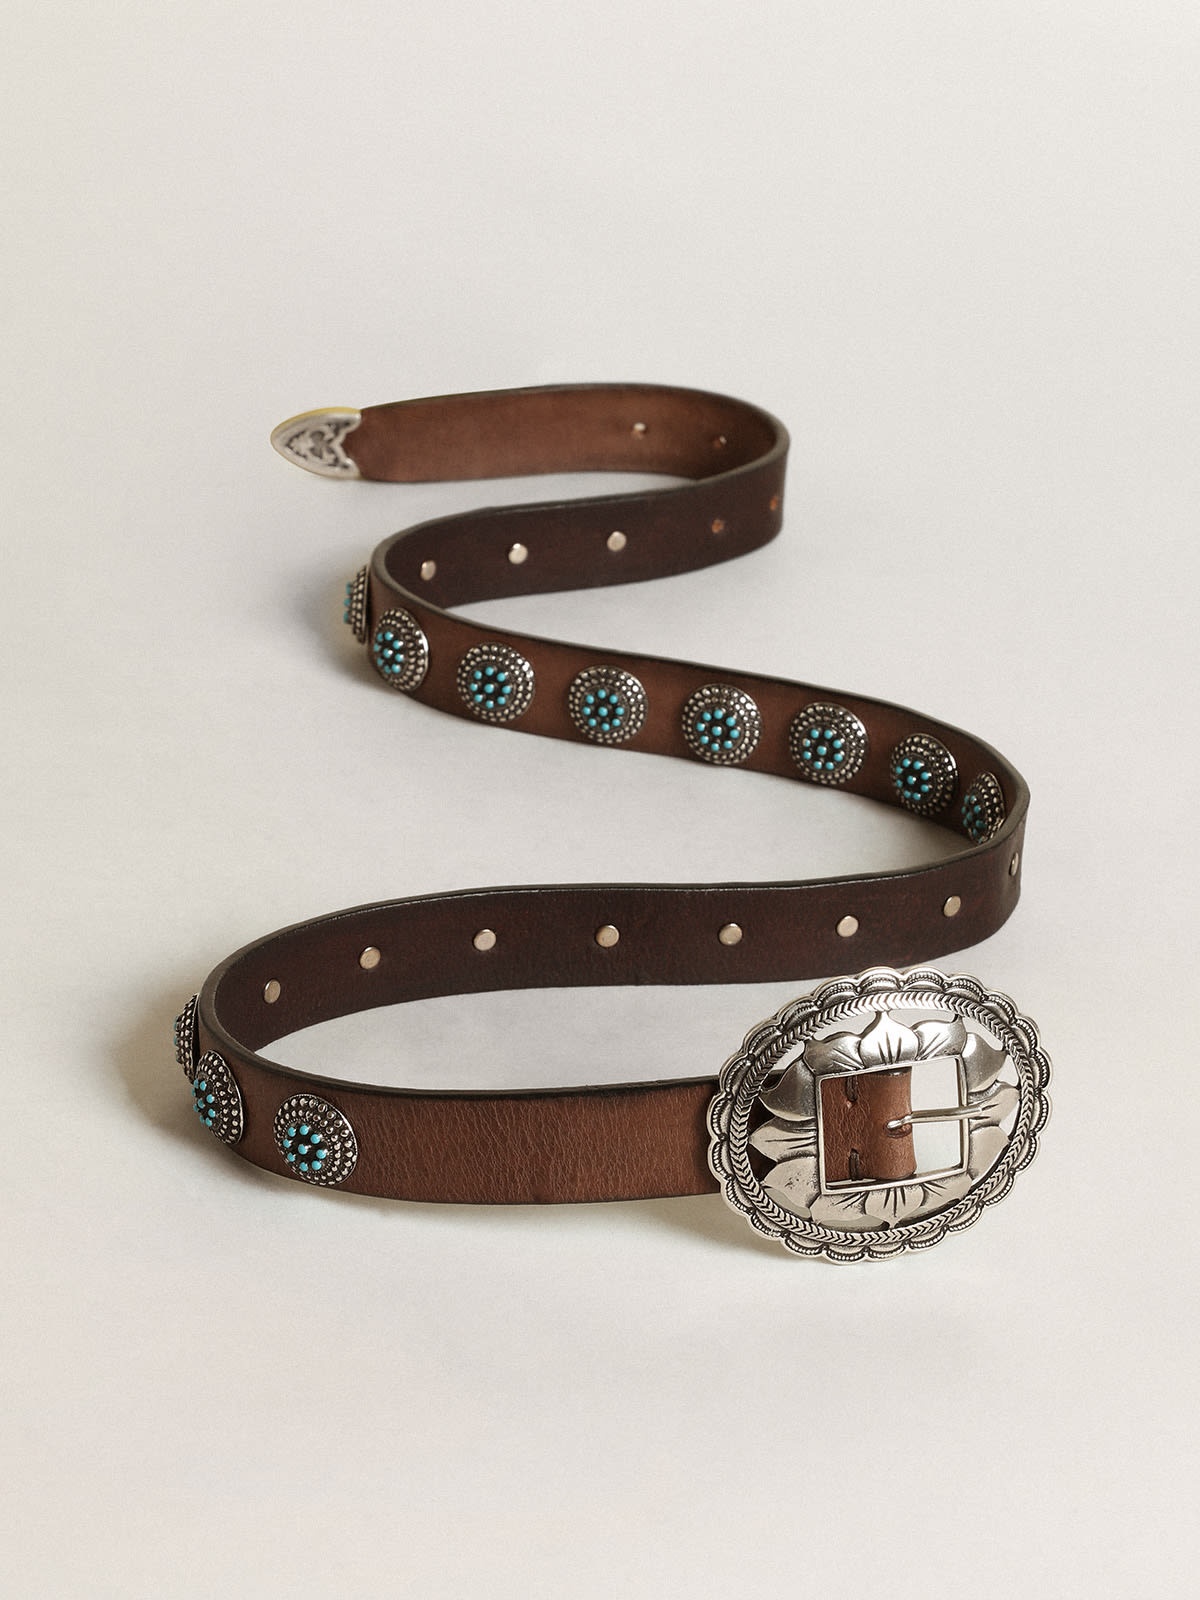 Women's belt in dark brown leather with silver studs - 4